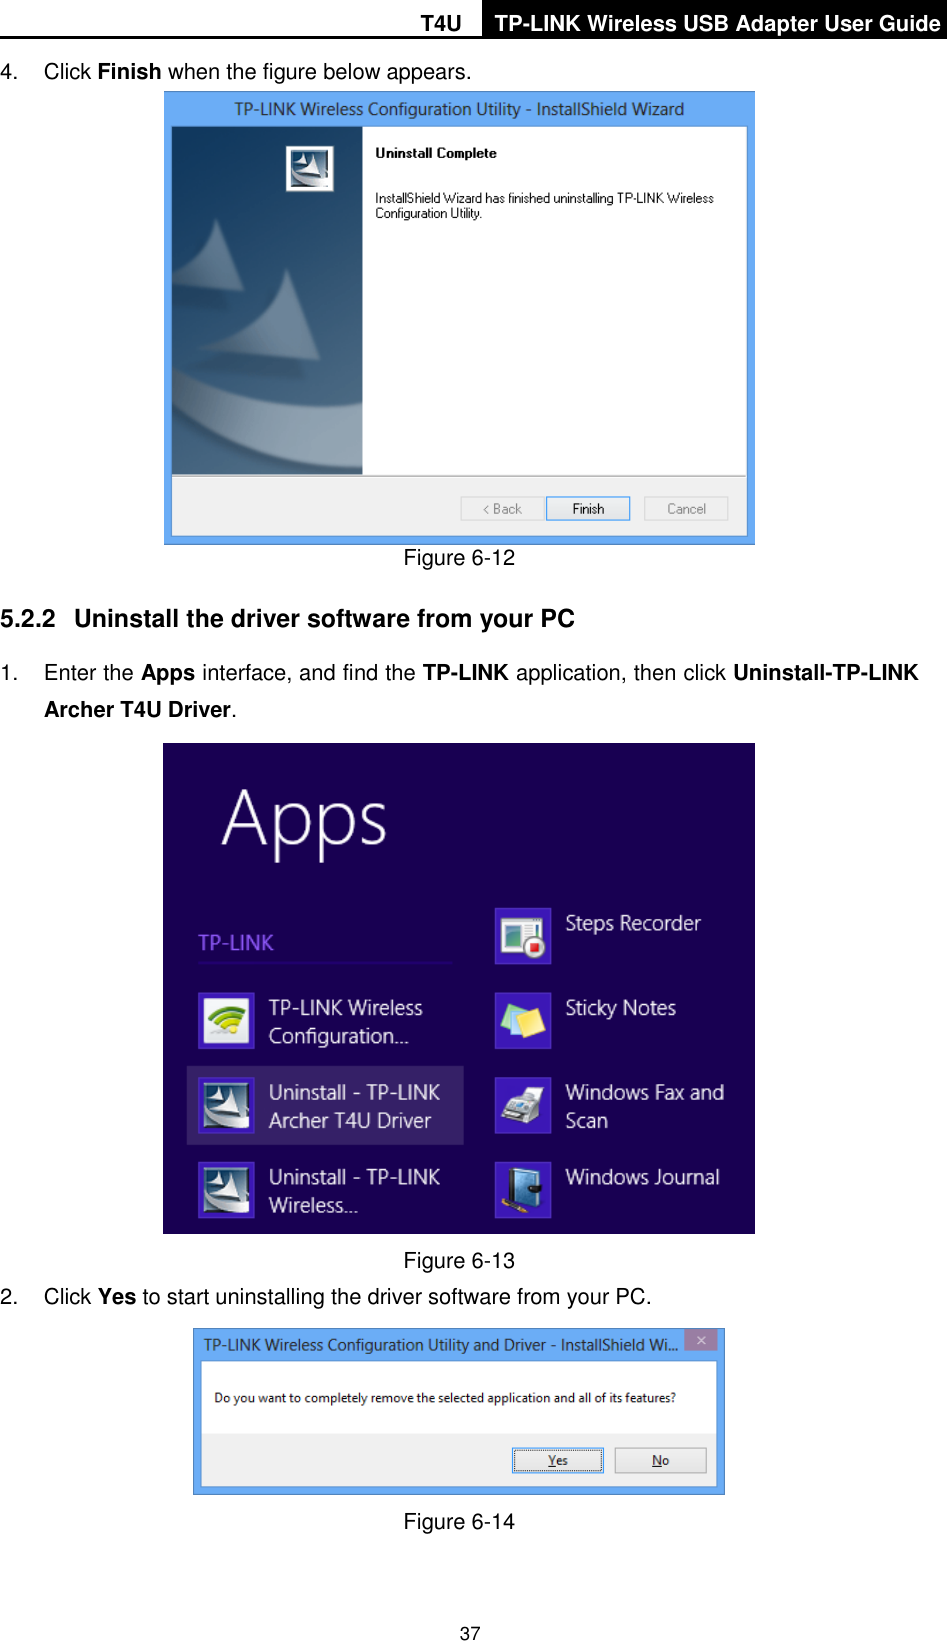 T4U TP-LINK Wireless USB Adapter User Guide   37 4.  Click Finish when the figure below appears.  Figure 6-12   5.2.2  Uninstall the driver software from your PC 1.  Enter the Apps interface, and find the TP-LINK application, then click Uninstall-TP-LINK Archer T4U Driver.  Figure 6-13   2.  Click Yes to start uninstalling the driver software from your PC.  Figure 6-14   